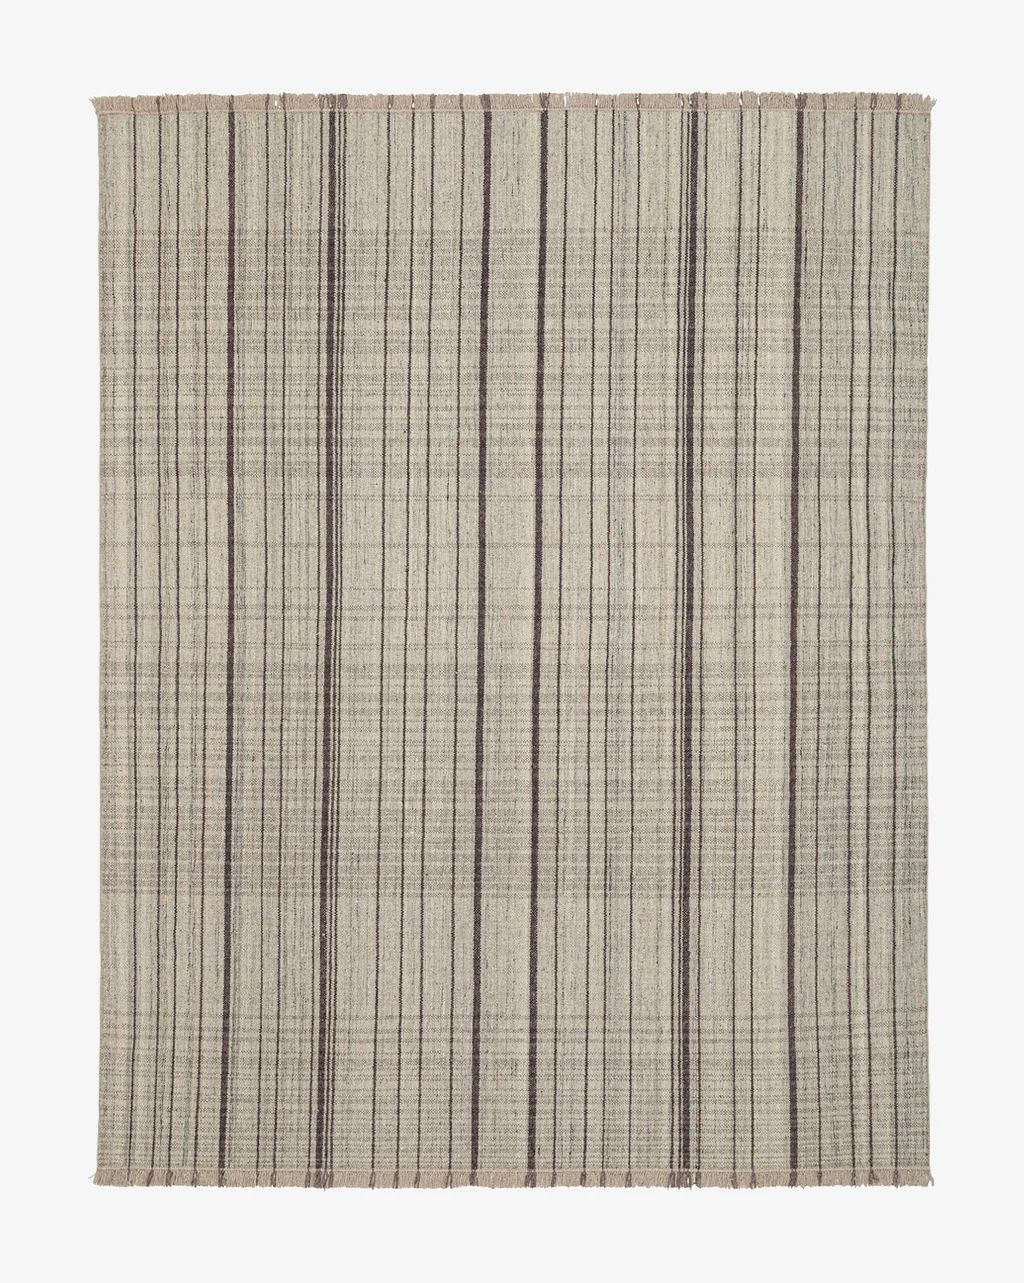 Searcy Handwoven Wool Rug | McGee & Co.